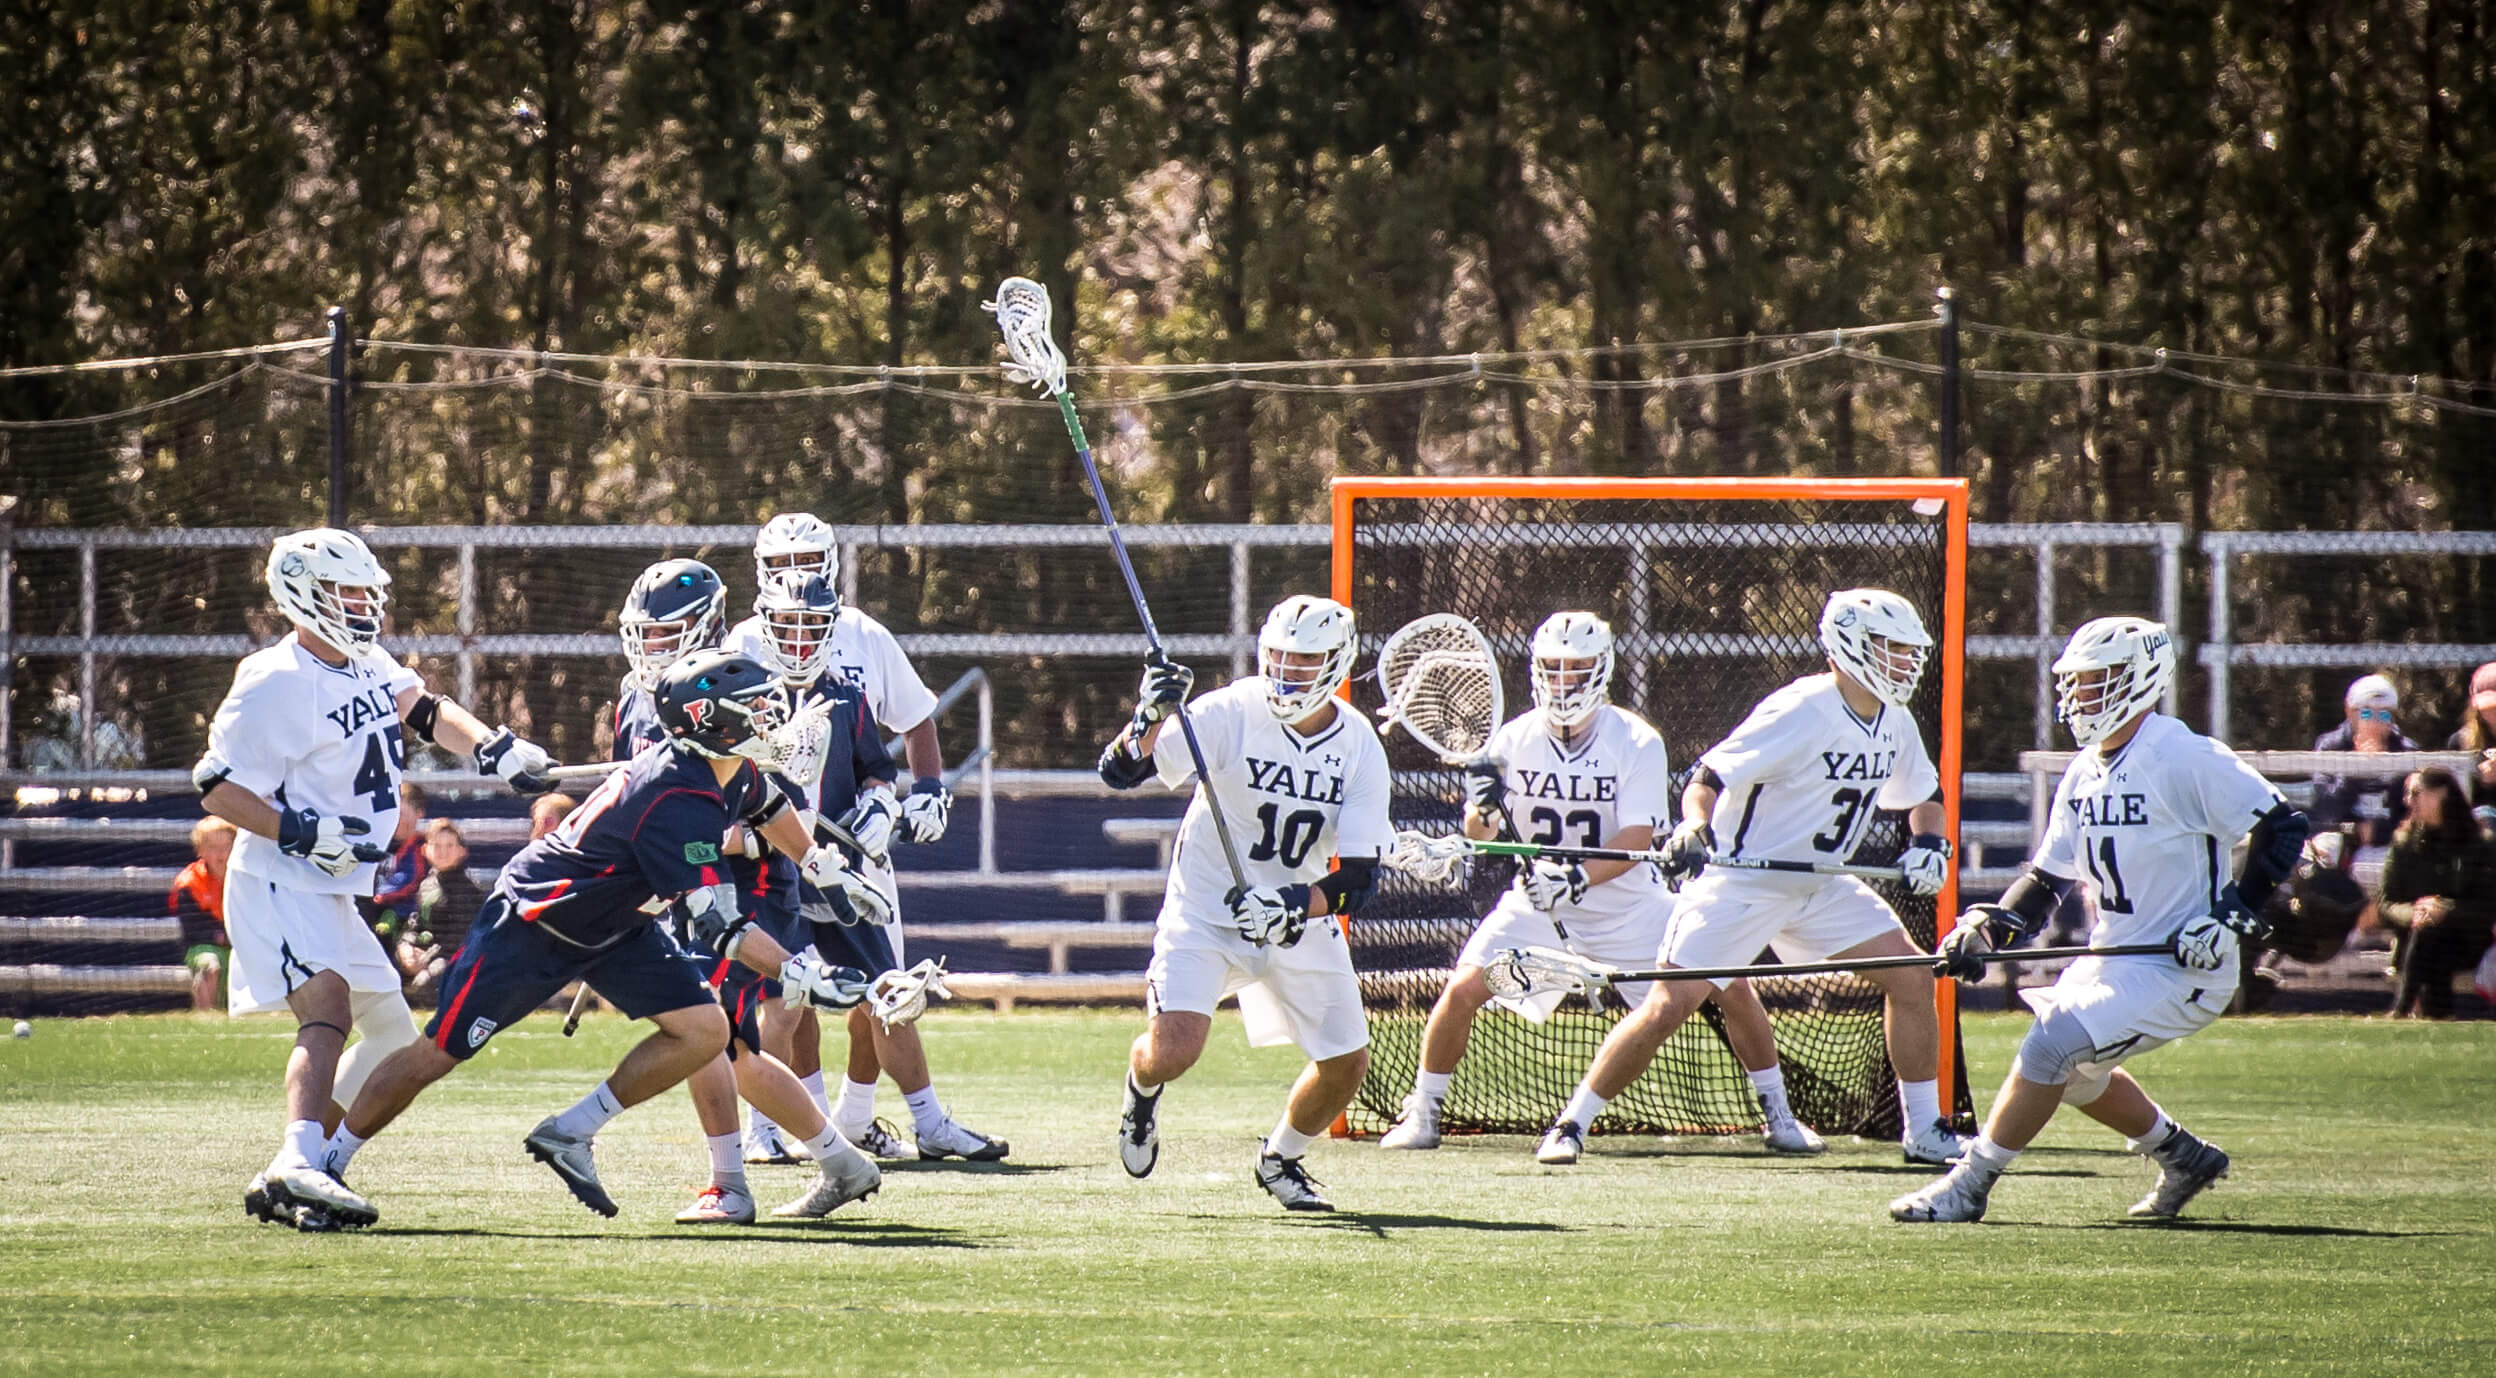 Lacrosse players defend the goal while an opponent runs toward them.